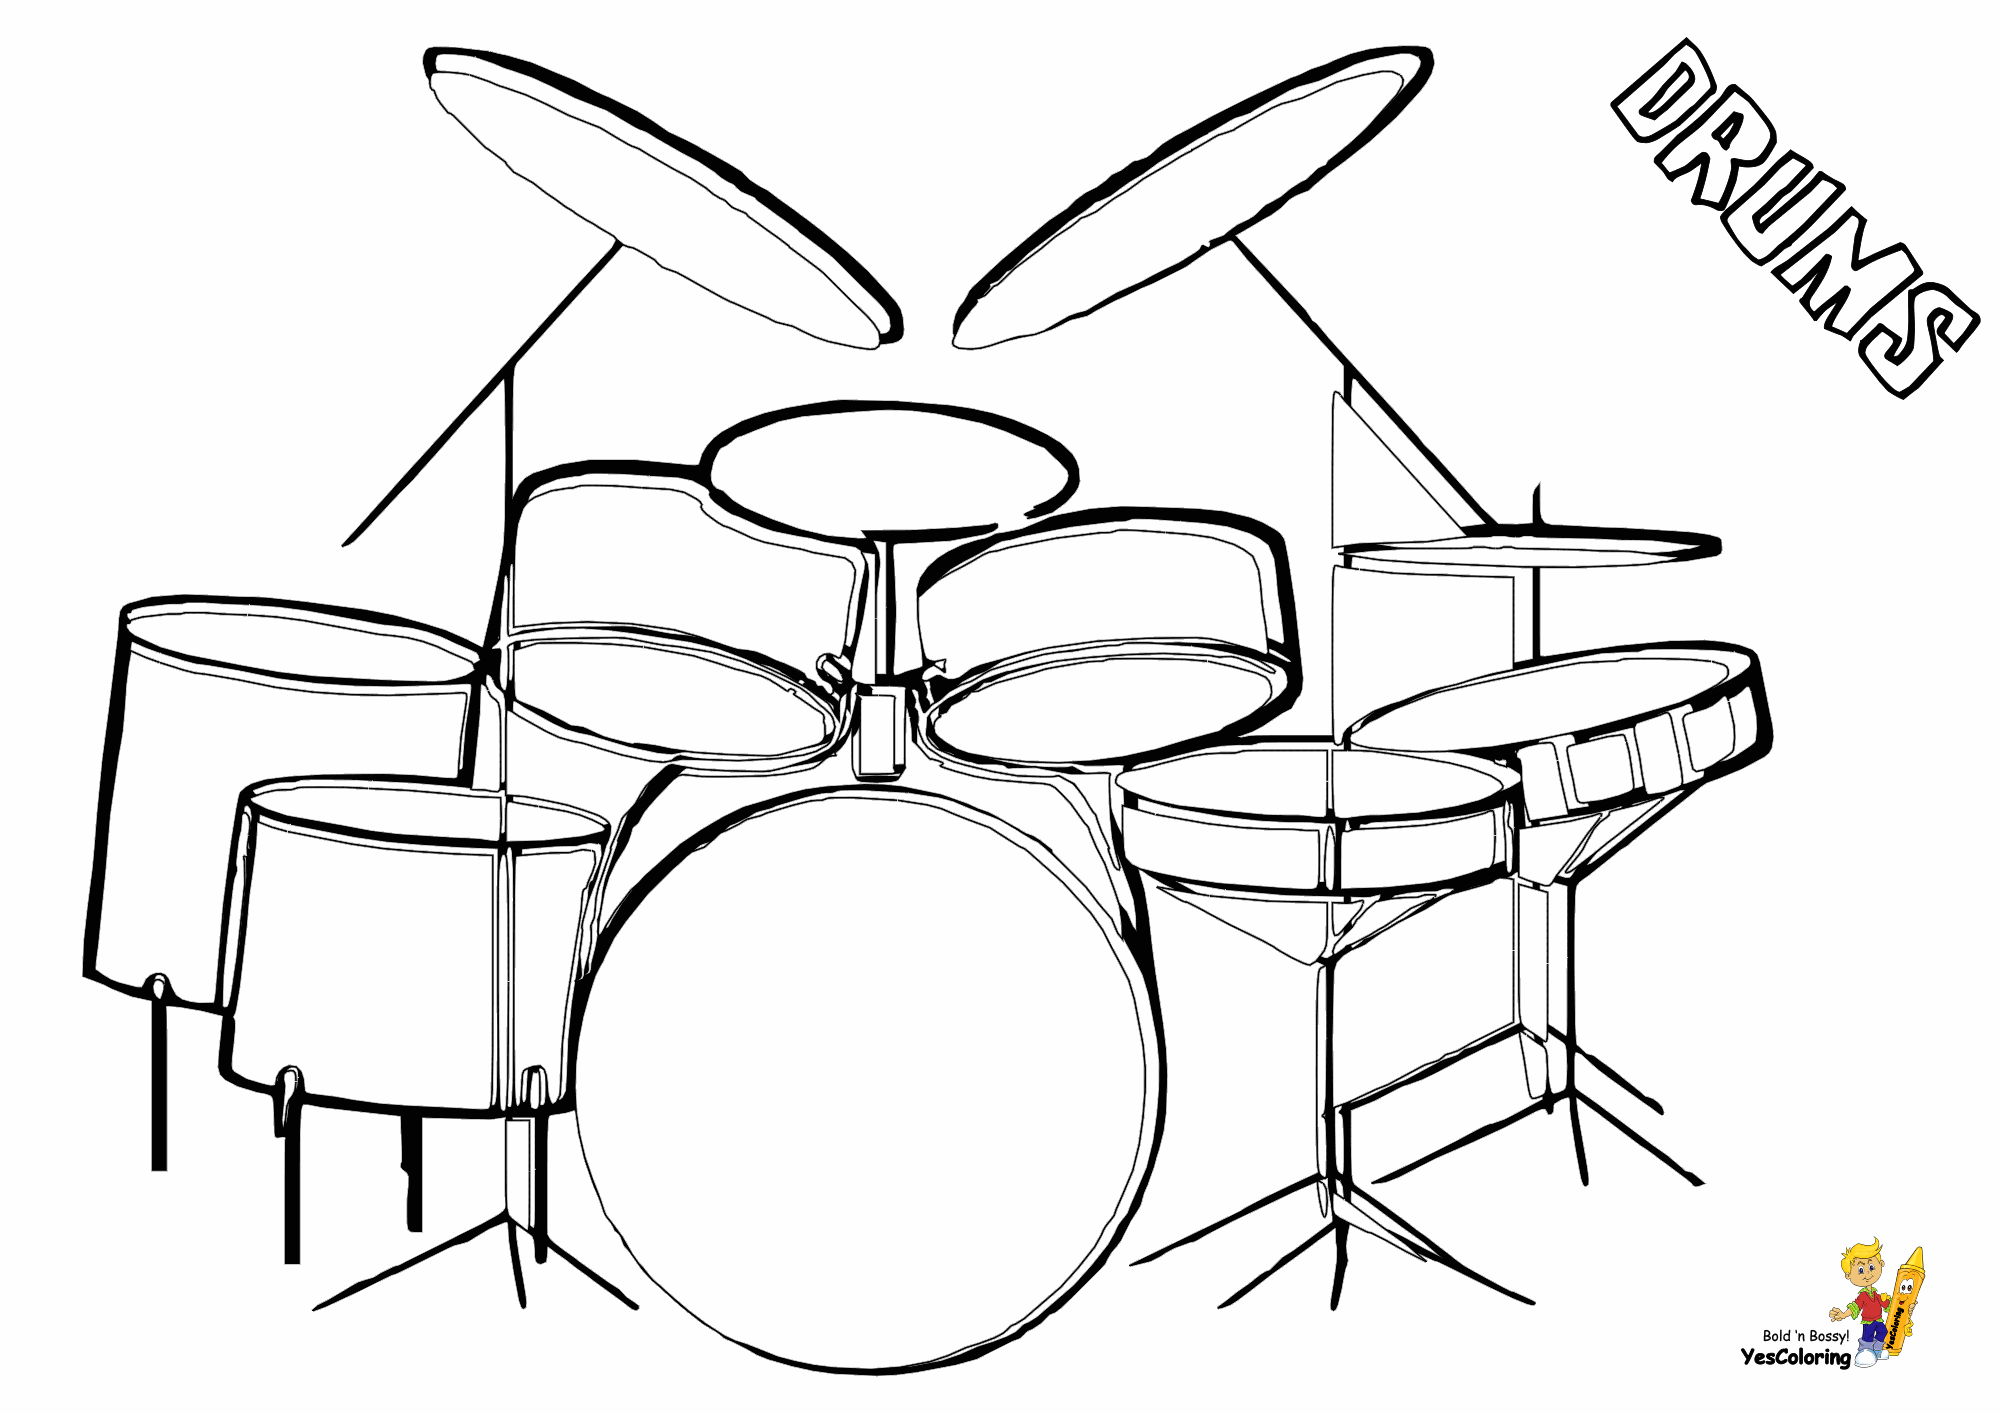 drums coloring page majestic musical drums coloring drums free snare coloring drums page 